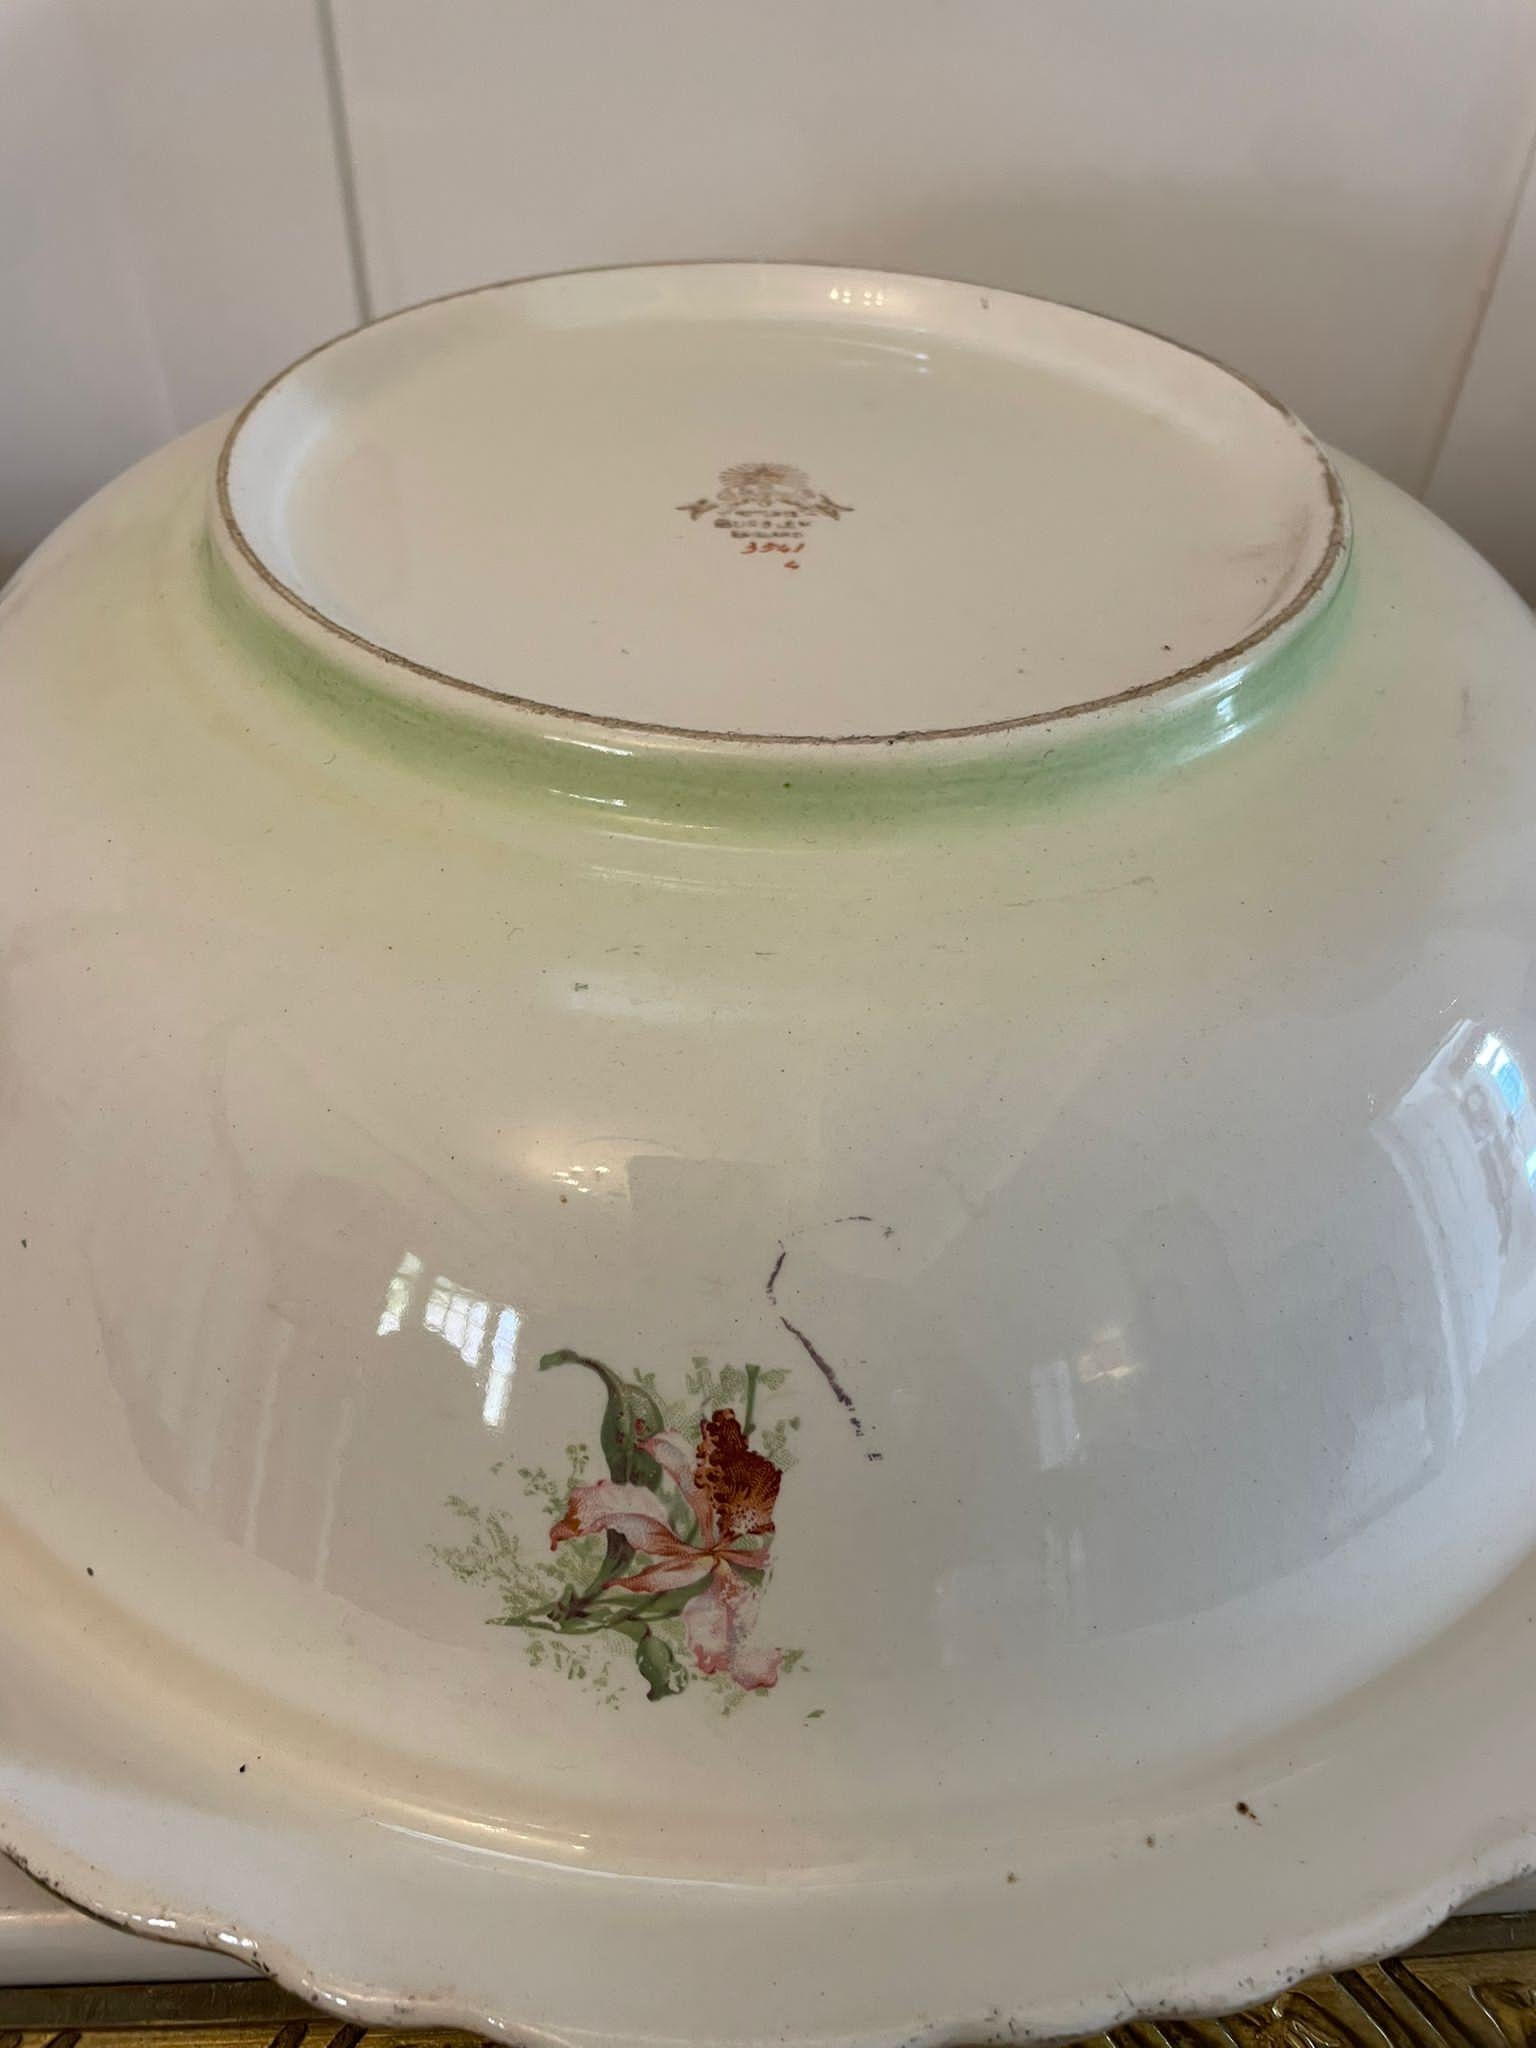 Antique Edwardian quality jug and bowl set antique in wonderful hand painted green, pink and gold colours perfect condition 

An attractive and desirable decorative object

Dimensions:
Jug H 30 x W 28 x D 24 (11.81 x 11.02 x 9.44 inches)
Bowl